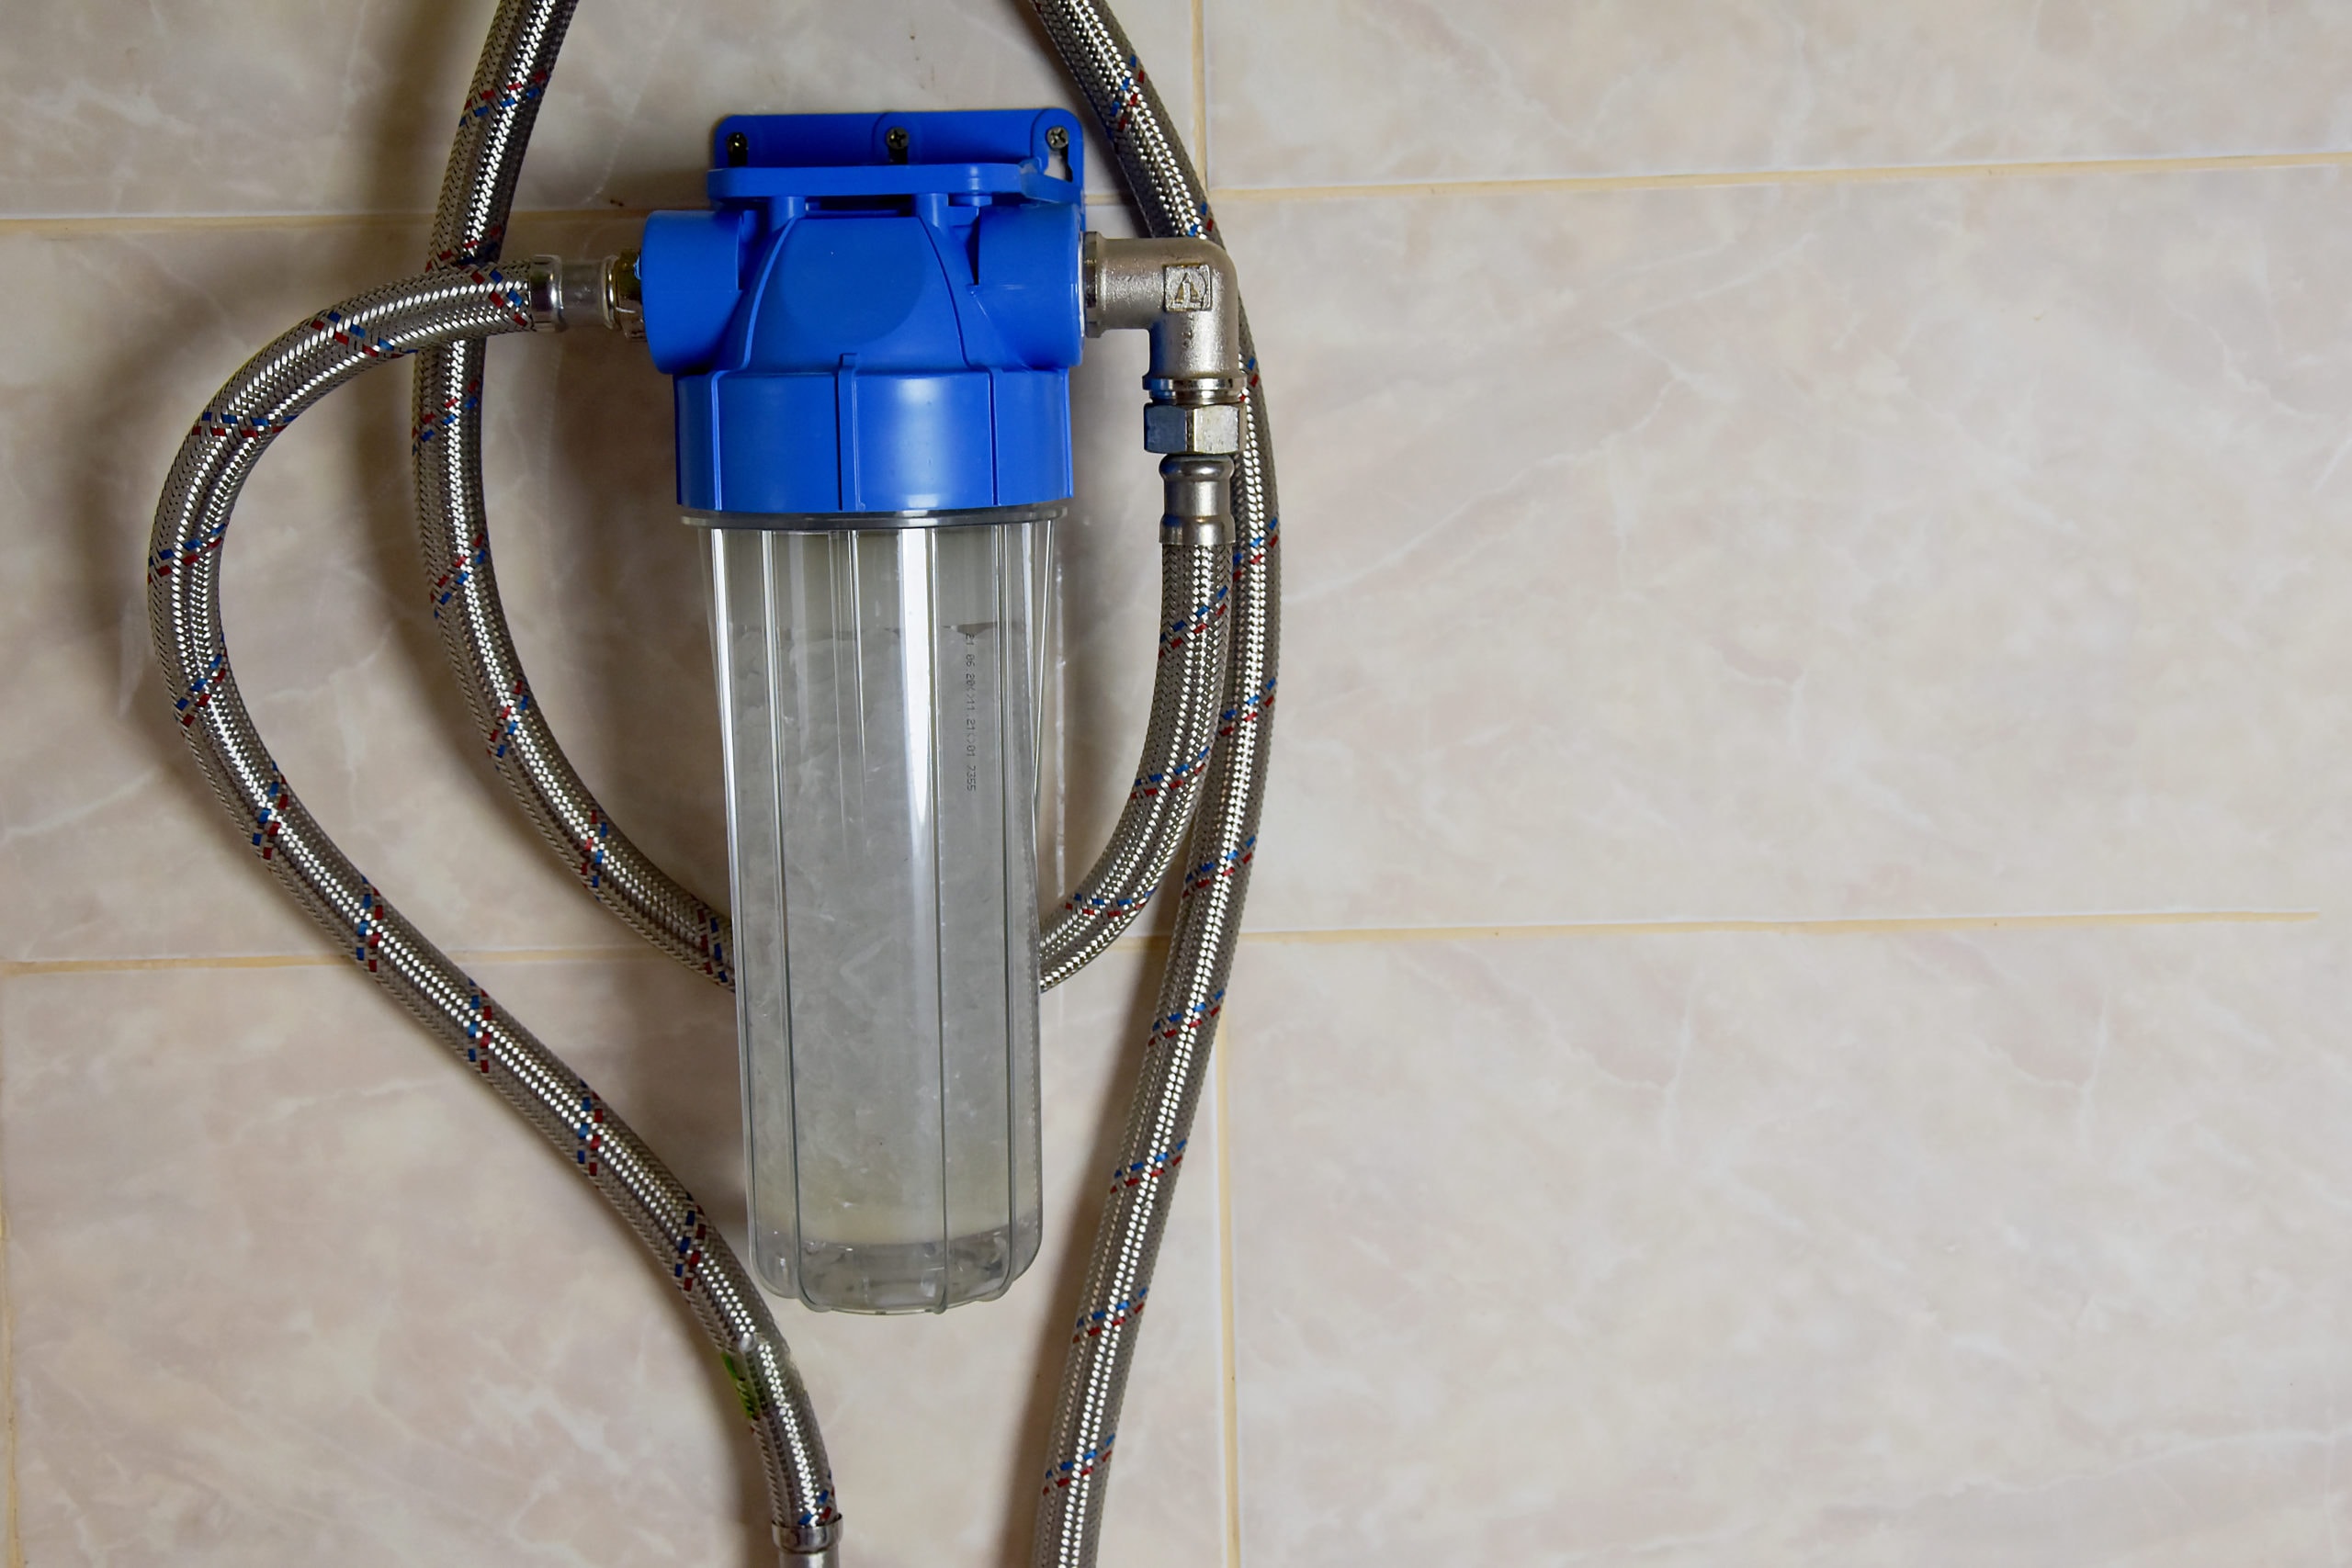 Close-up view of a compact water softening and filtration system. Universal home water softening system.